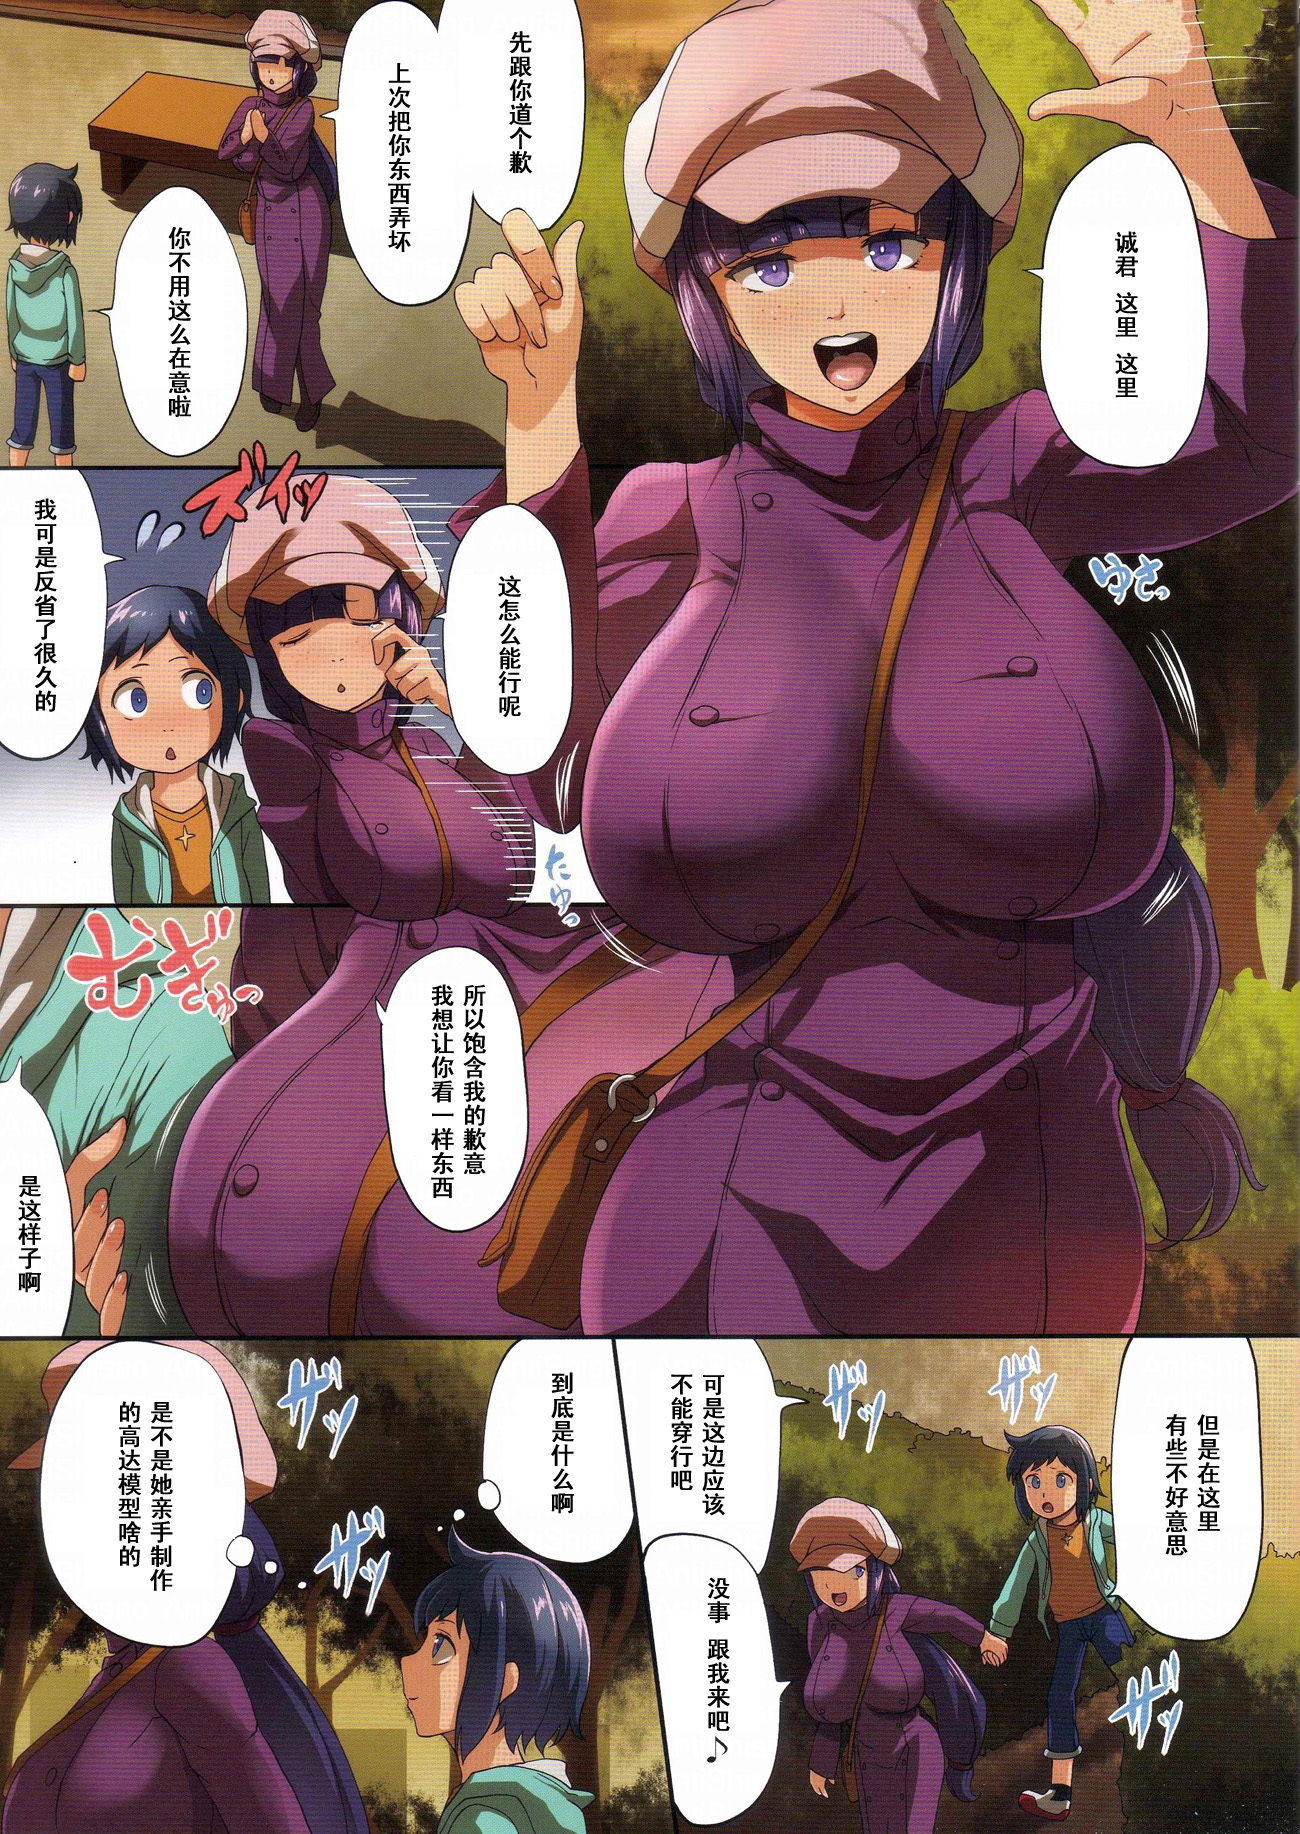 (COMIC1☆8) [Gate of XIII (Kloah)] STARBUST MEMORY (Gundam Build Fighters) [Chinese] [黑条汉化] page 2 full